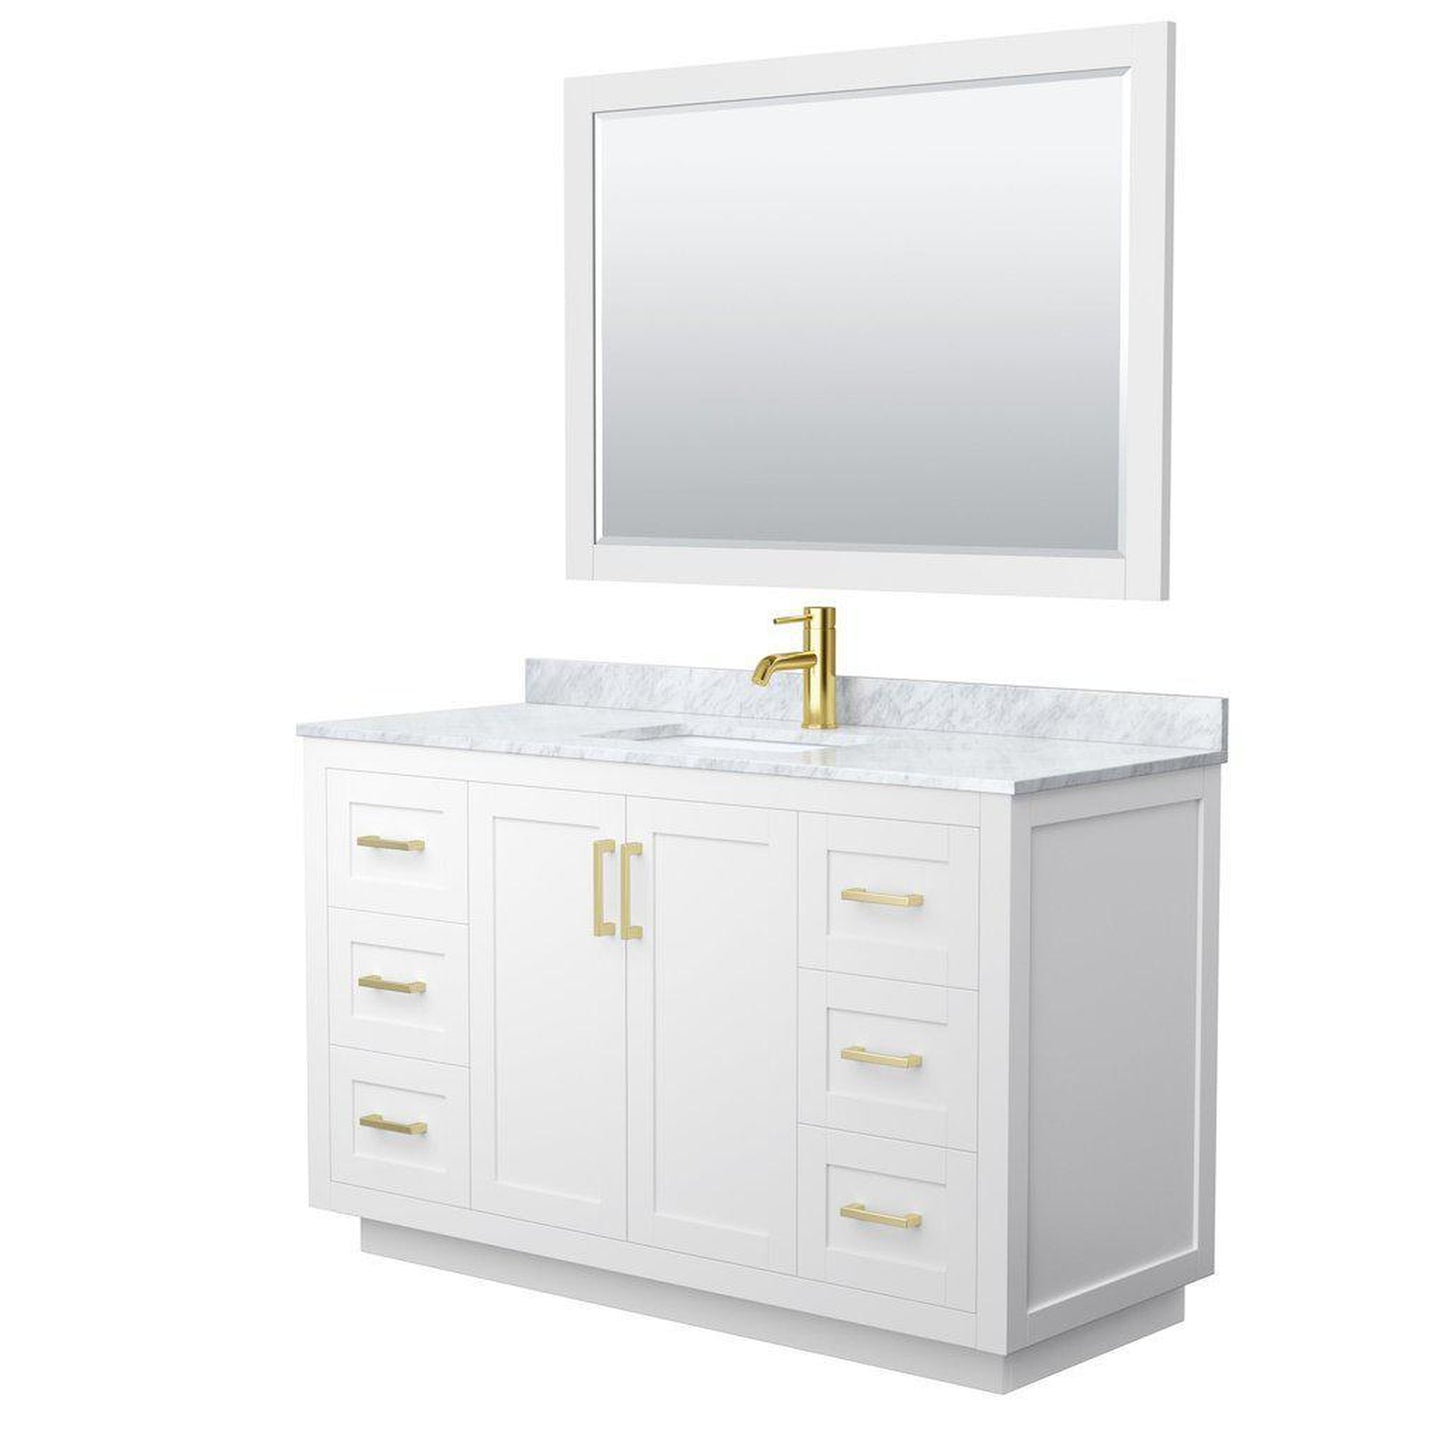 Wyndham Collection Miranda 54" Single Bathroom White Vanity Set With White Carrara Marble Countertop, Undermount Square Sink, 46" Mirror And Brushed Gold Trim